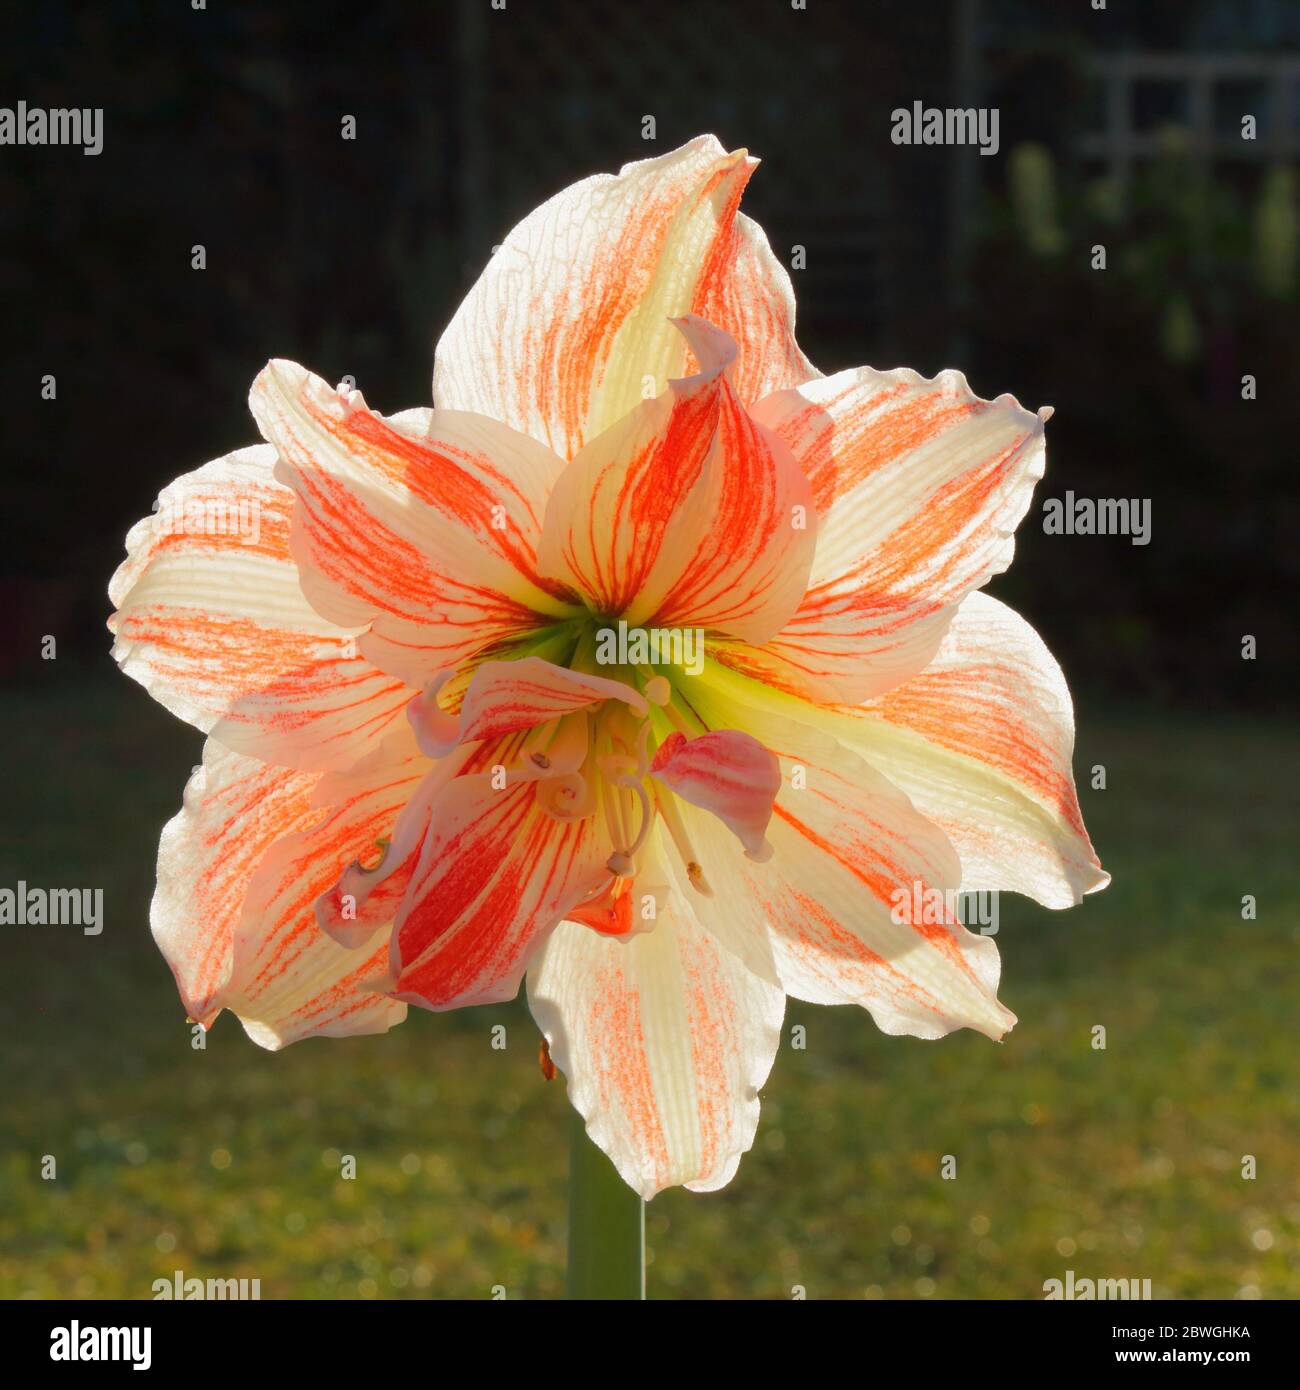 Close-up of amaryllis  flower head in bloom Stock Photo